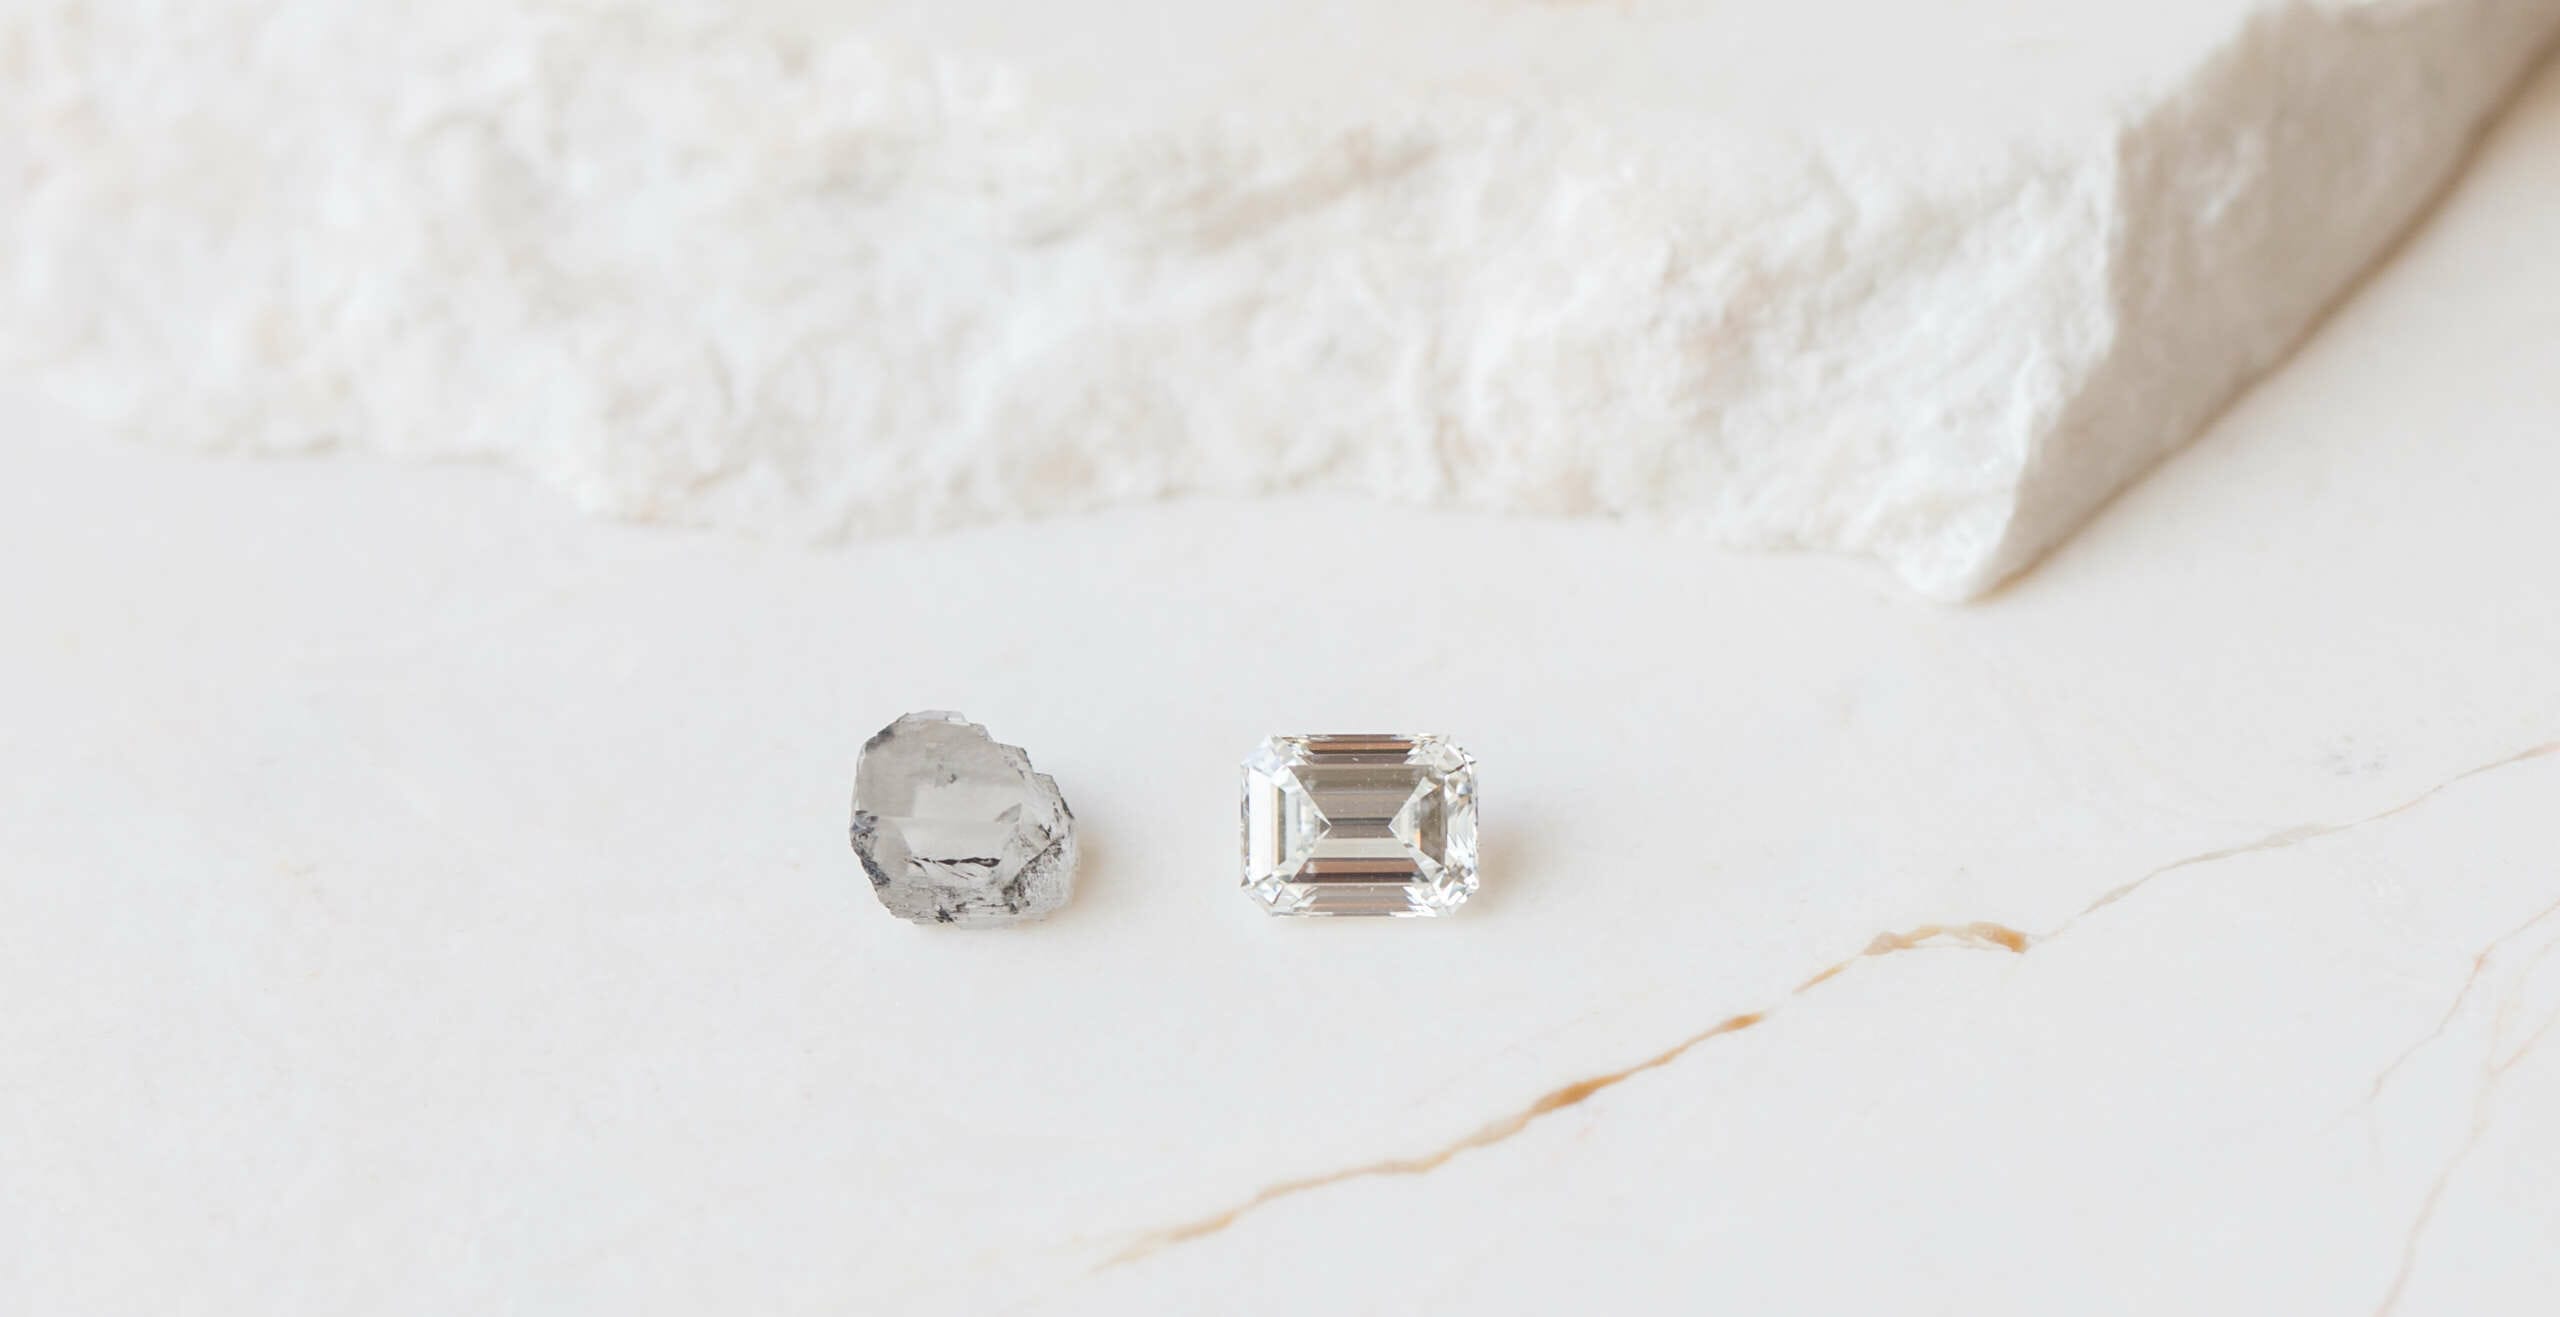 Two diamonds of different size on a while marble table. showing different carat weights.